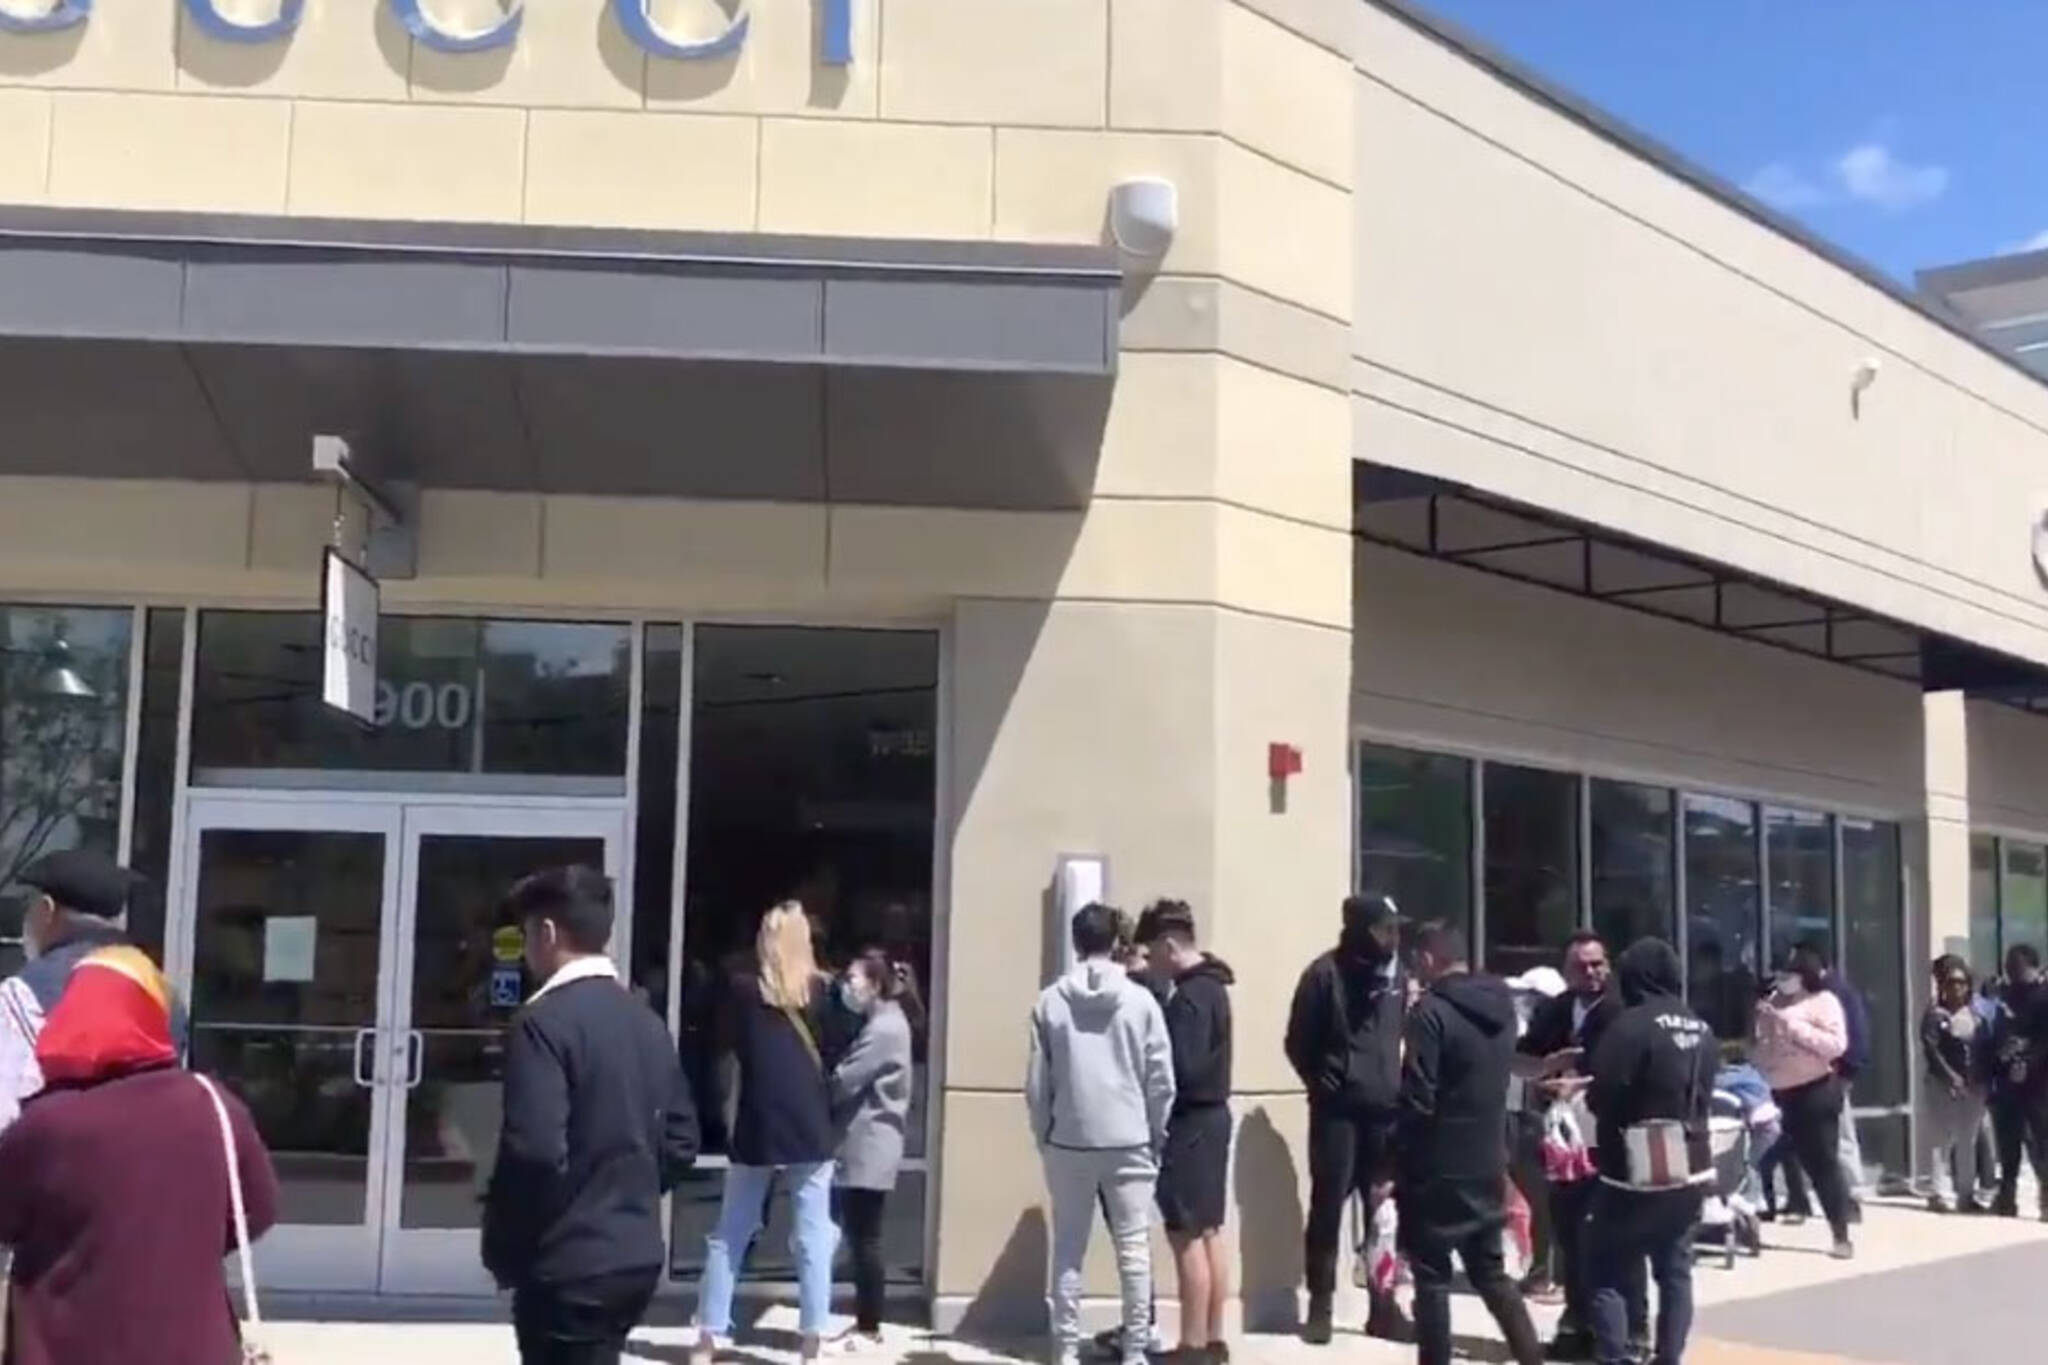 Toronto Premium Outlet mall is now open and it's already drawing